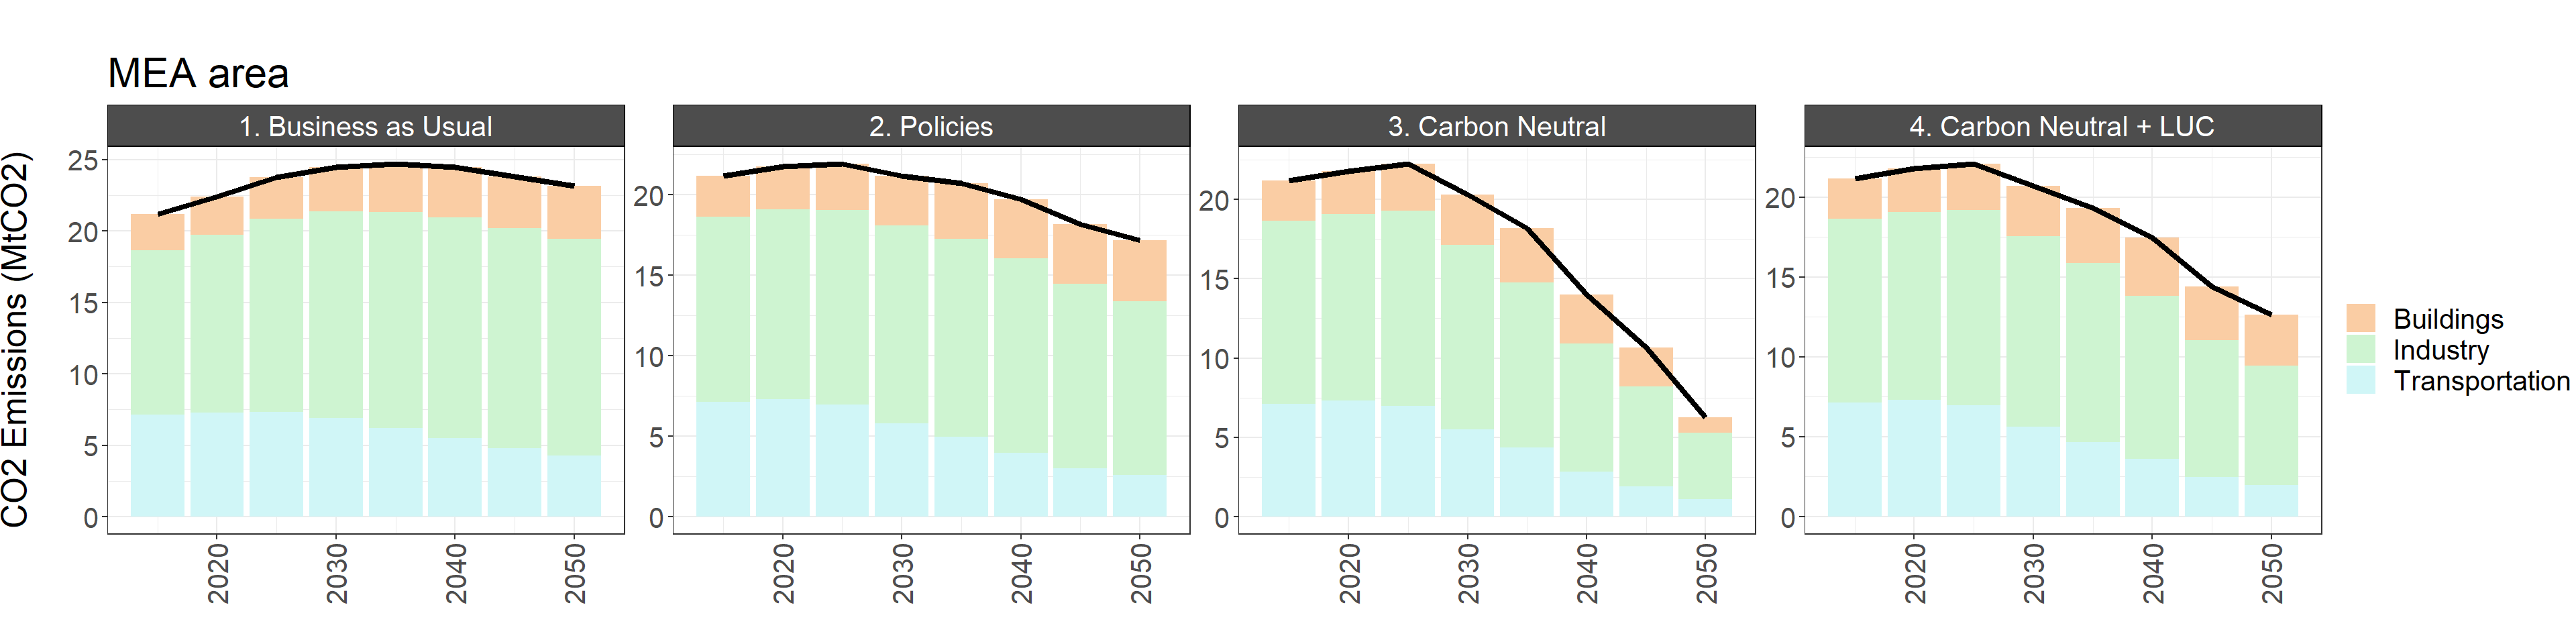 MEA area CO2 emissions by sector, GHG emissions by gas, and GHG emissions by sector in the reference scenario and the low and high policies scenarios